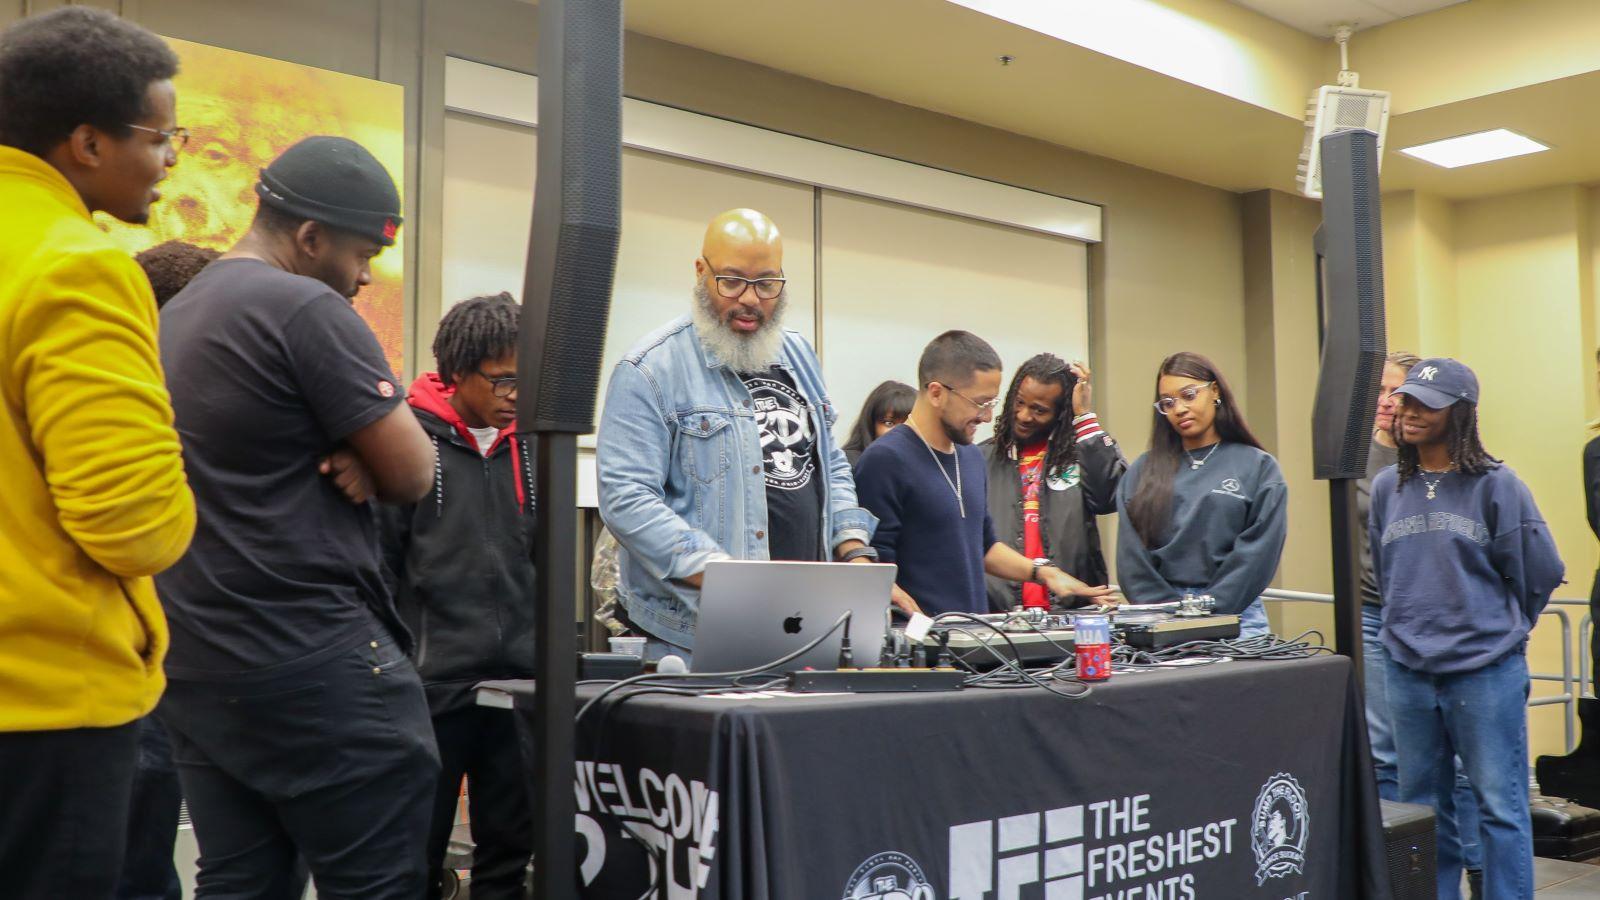 DJ O Sharp leading a music demonstration at the Roots & Rhythms event/